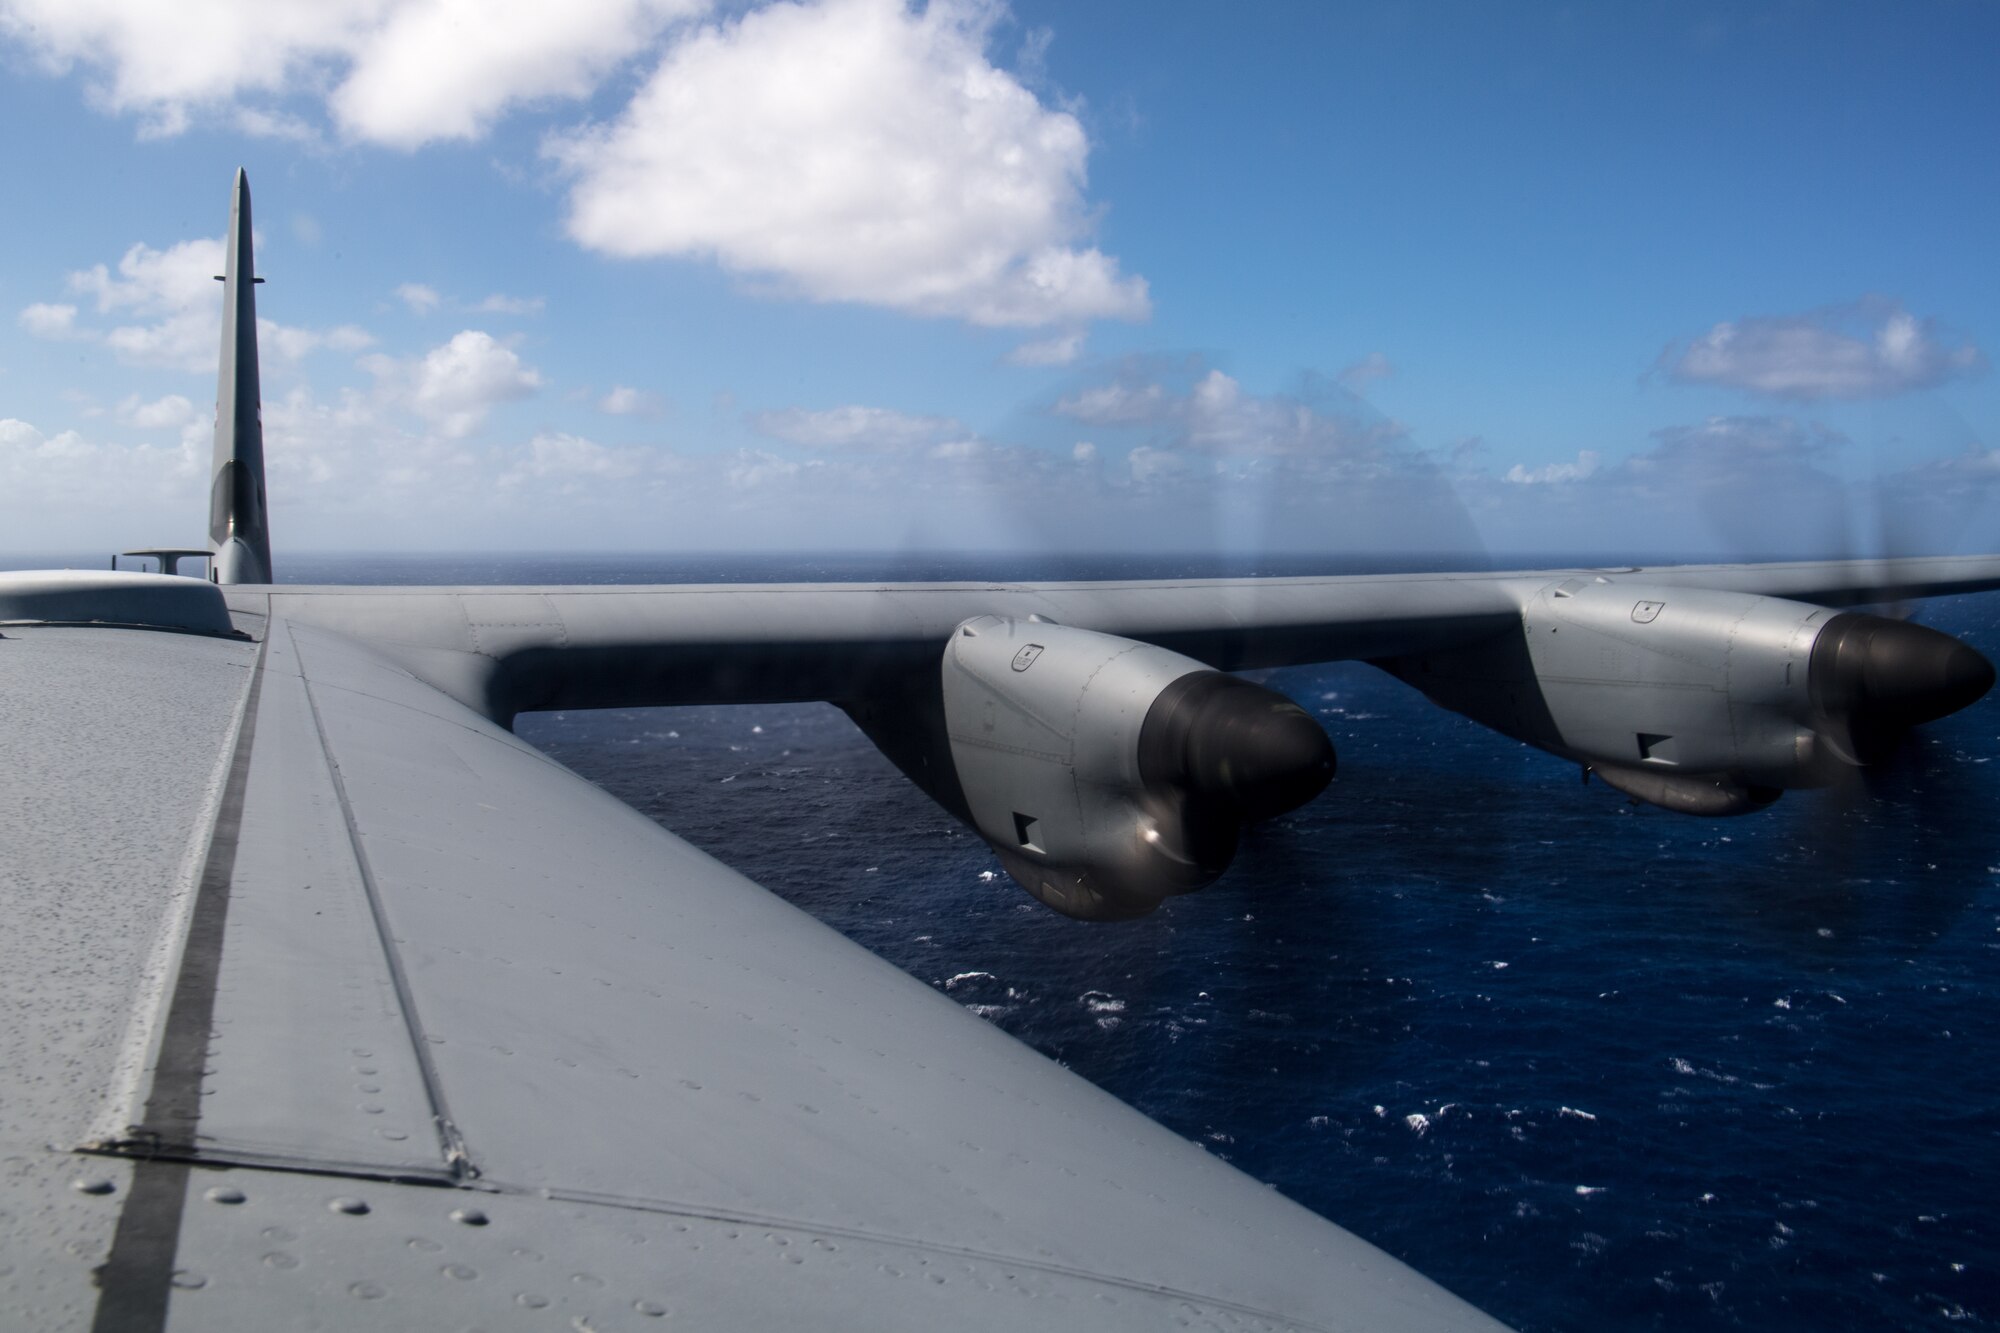 A C-130J Super Hercules flies over the Pacific Ocean for an airdrop of container delivery systems over Tinian during Exercise Cope North 20, Feb. 24, 2020, Andersen Air Force Base, Guam. Cope North 20 is an annual trilateral field training exercise conducted at Andersen Air Force Base, Guam, and around the Commonwealth of the Northern Mariana Islands (CNMI), Palau and Yap in the Federated States of Micronesia. (U.S. Air Force photo by Senior Airman Gracie Lee)